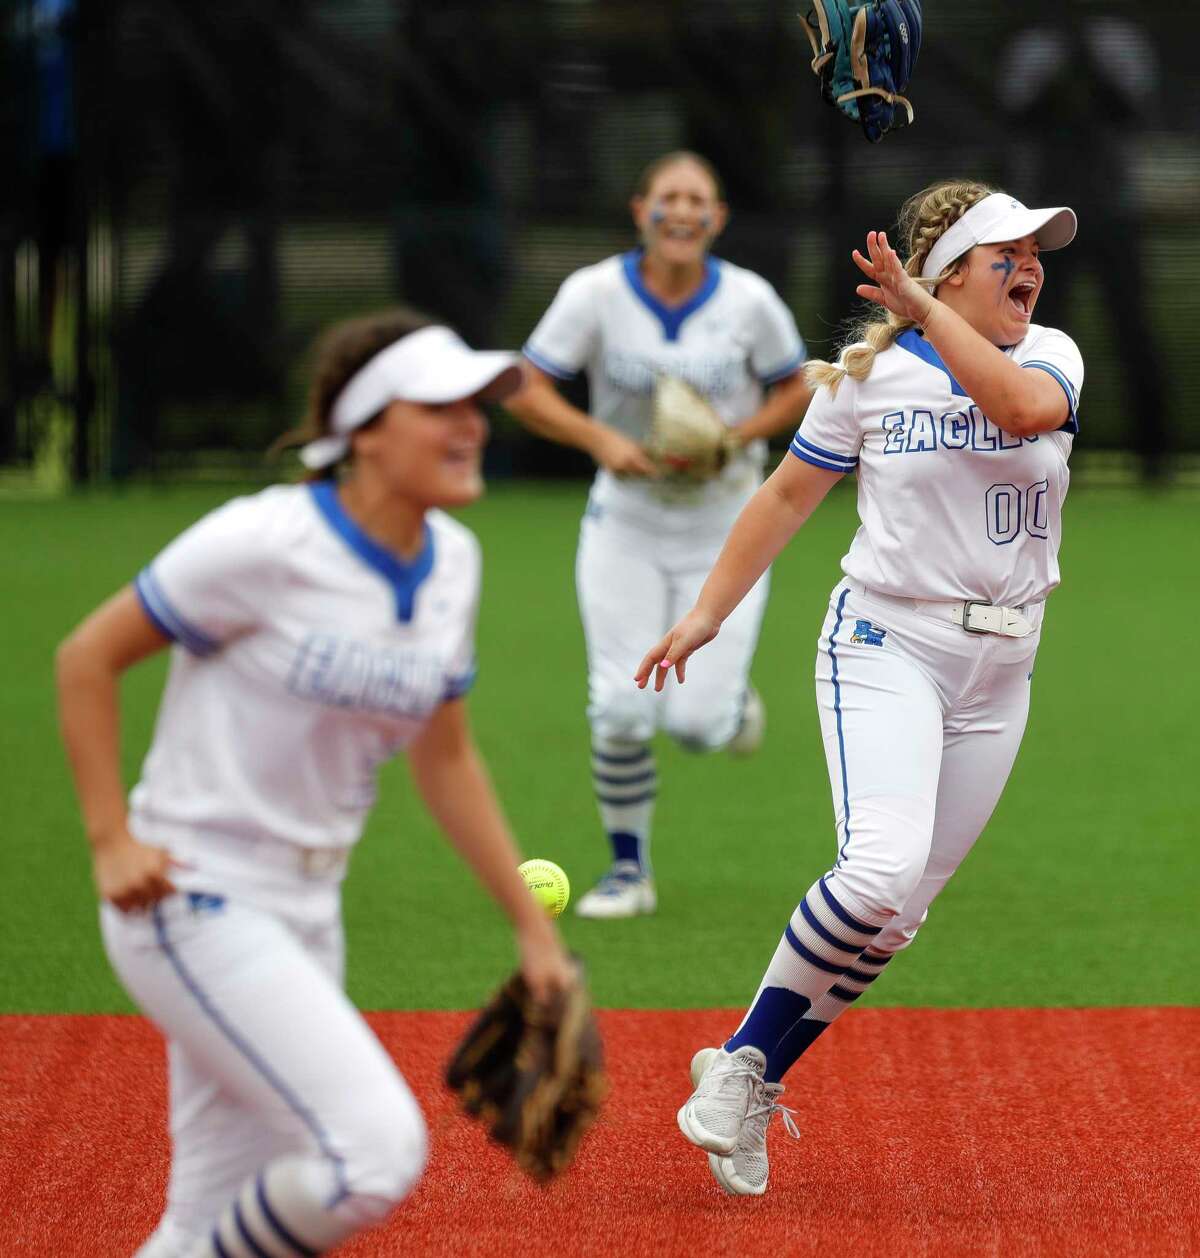 Barbers Hill shortstop Katelynn Cooper (00) reacts after catching a fly ball by Mallory Pyle for the final out of the game to defeat Hallsville 6-0 and advance to the Class 5A state championship, Friday, June 4, 2021, in Leander.